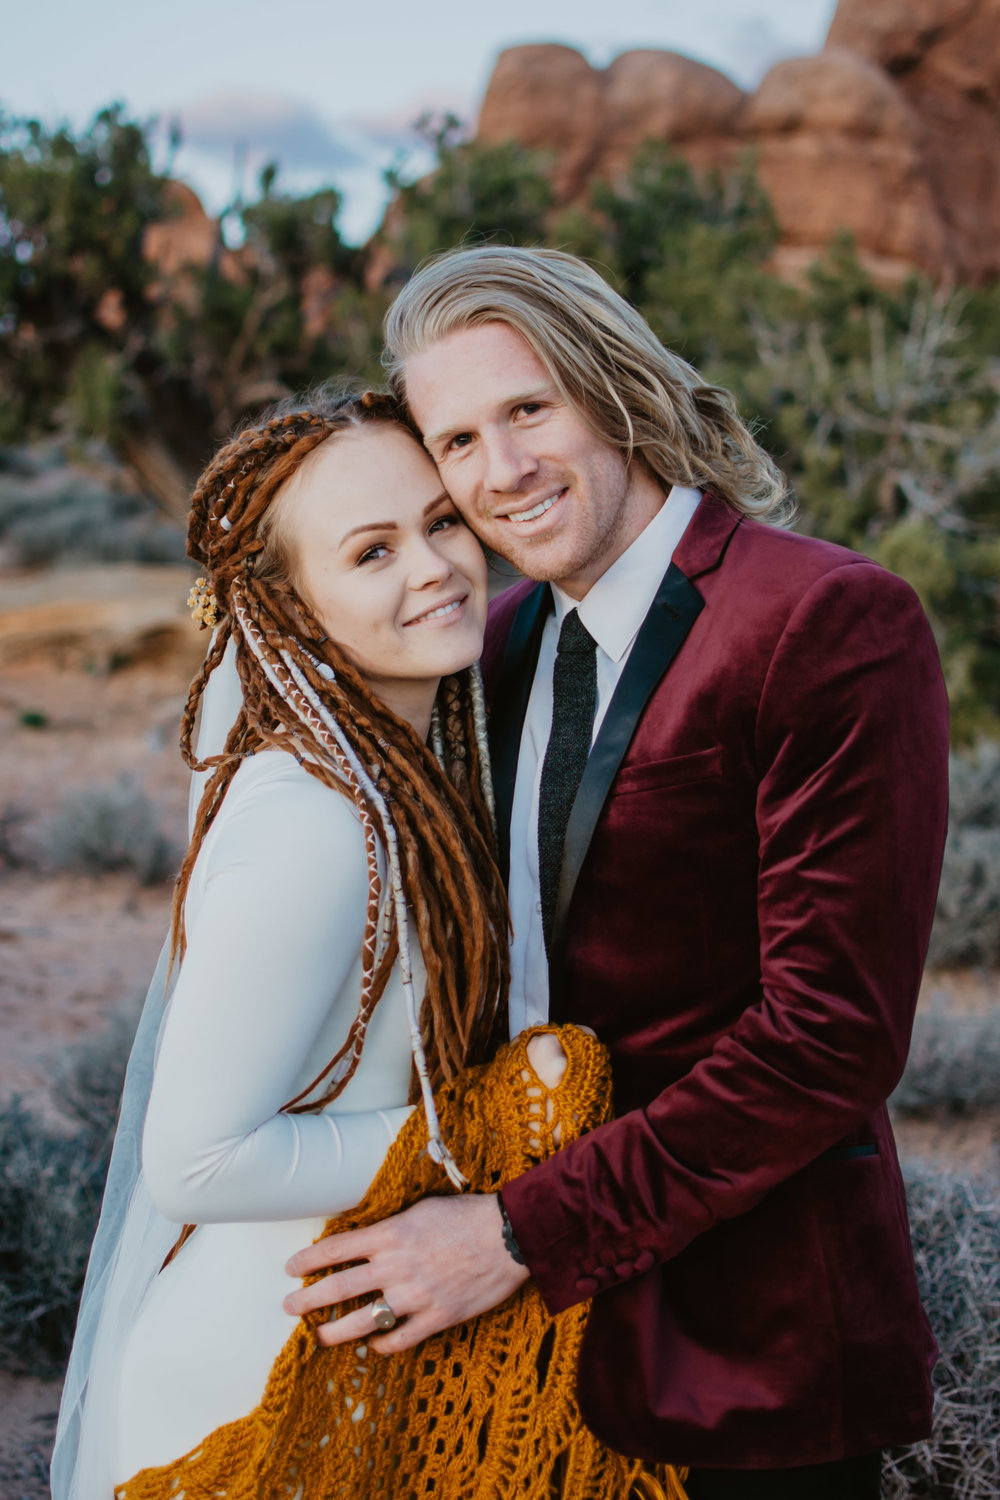 Jocilyn Bennett Photography | Destination Wedding Photographer | Elopement Wedding Photographer | National Park Elopement Photography | Capturing raw and genuine emotion | Utah Photographer | Utah wedding Photographer| National Park Weddings | Adventure Photographer | Bohemian photography | Bohemian wedding | Arches wedding | Arches National Park | Bride with dreads | Candid Bridal Photos | handmade bridal gown | ASOS red suit coat | yellow knitted cover for dress |